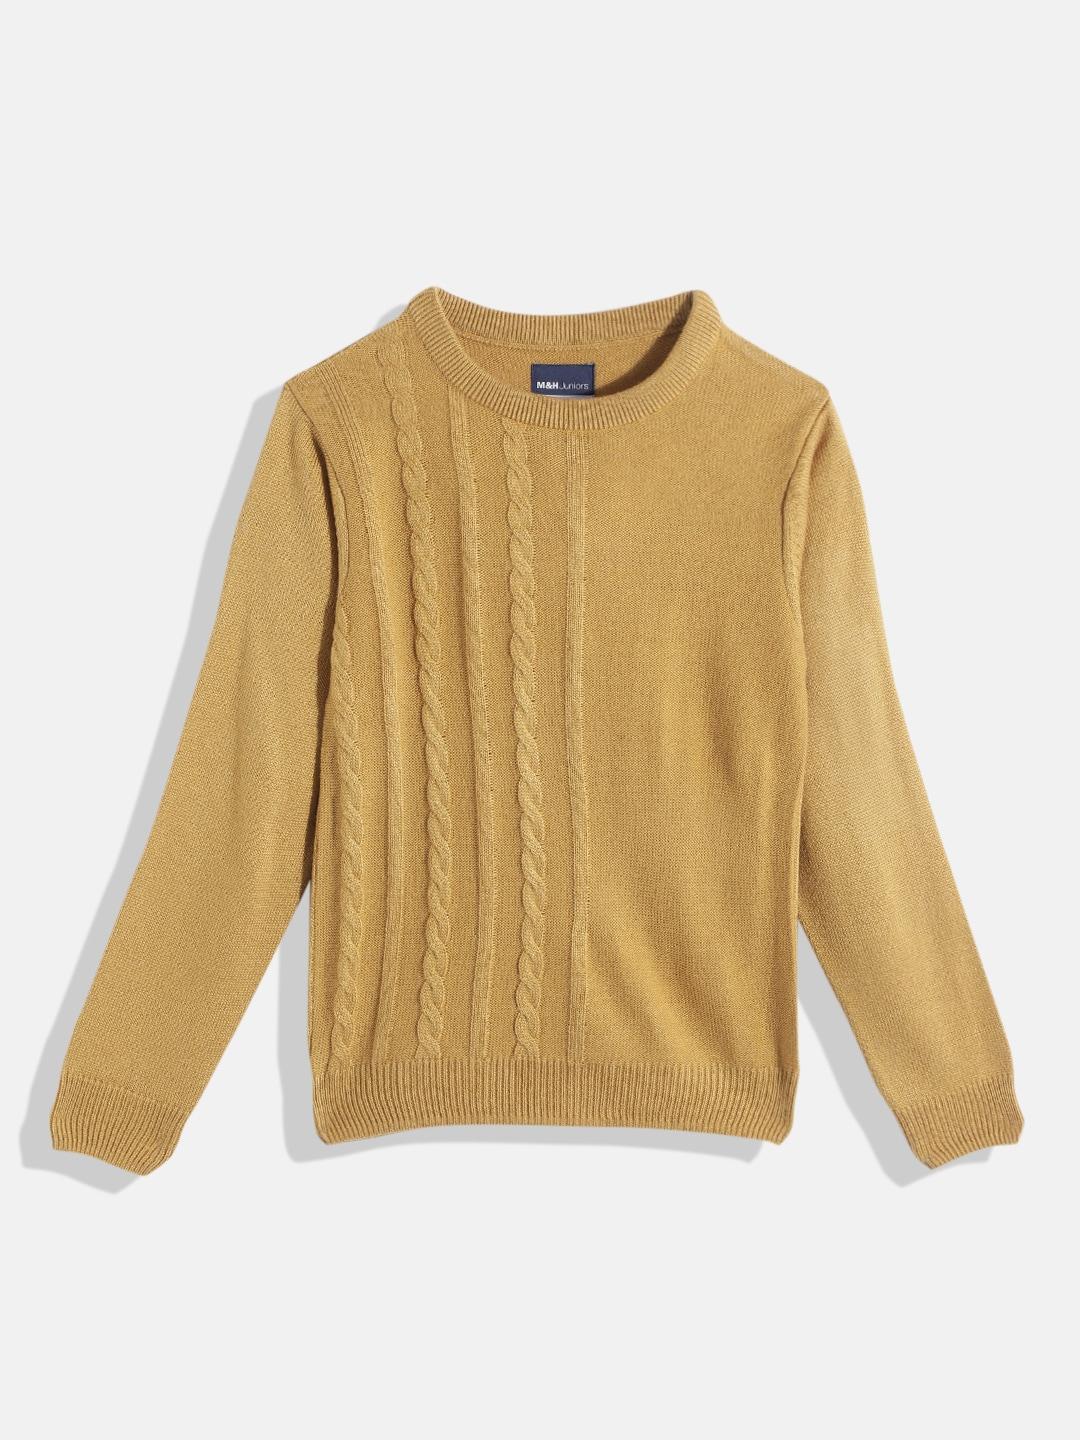 m&h juniors boys mustard yellow cable knit pullover